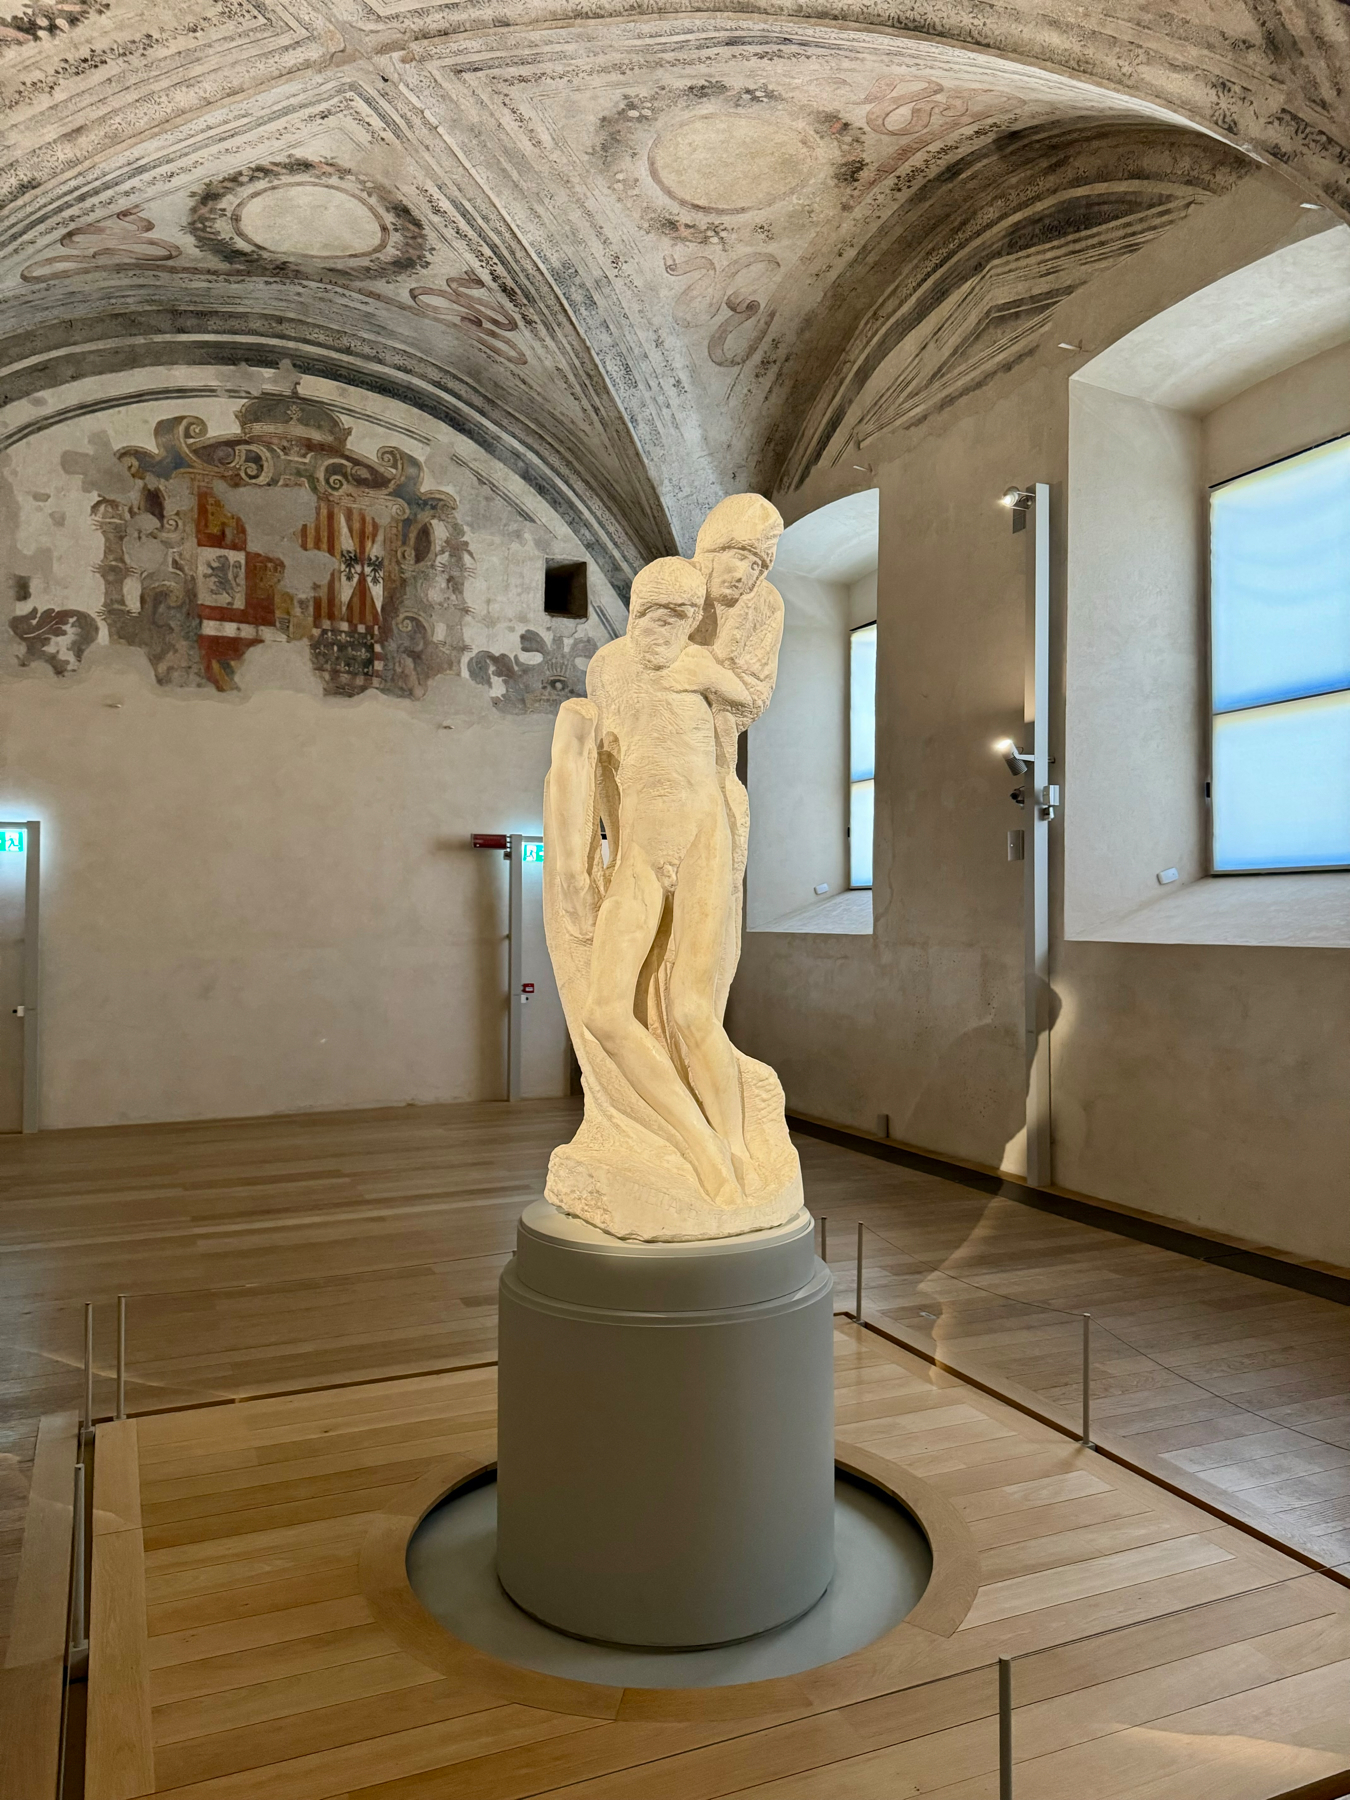 A marble sculpture of two intertwined figures stands in the center of a room with vaulted ceilings adorned with frescoes. The sculpture is displayed on a circular podium with a light wooden floor and has soft natural lighting from two large windows.